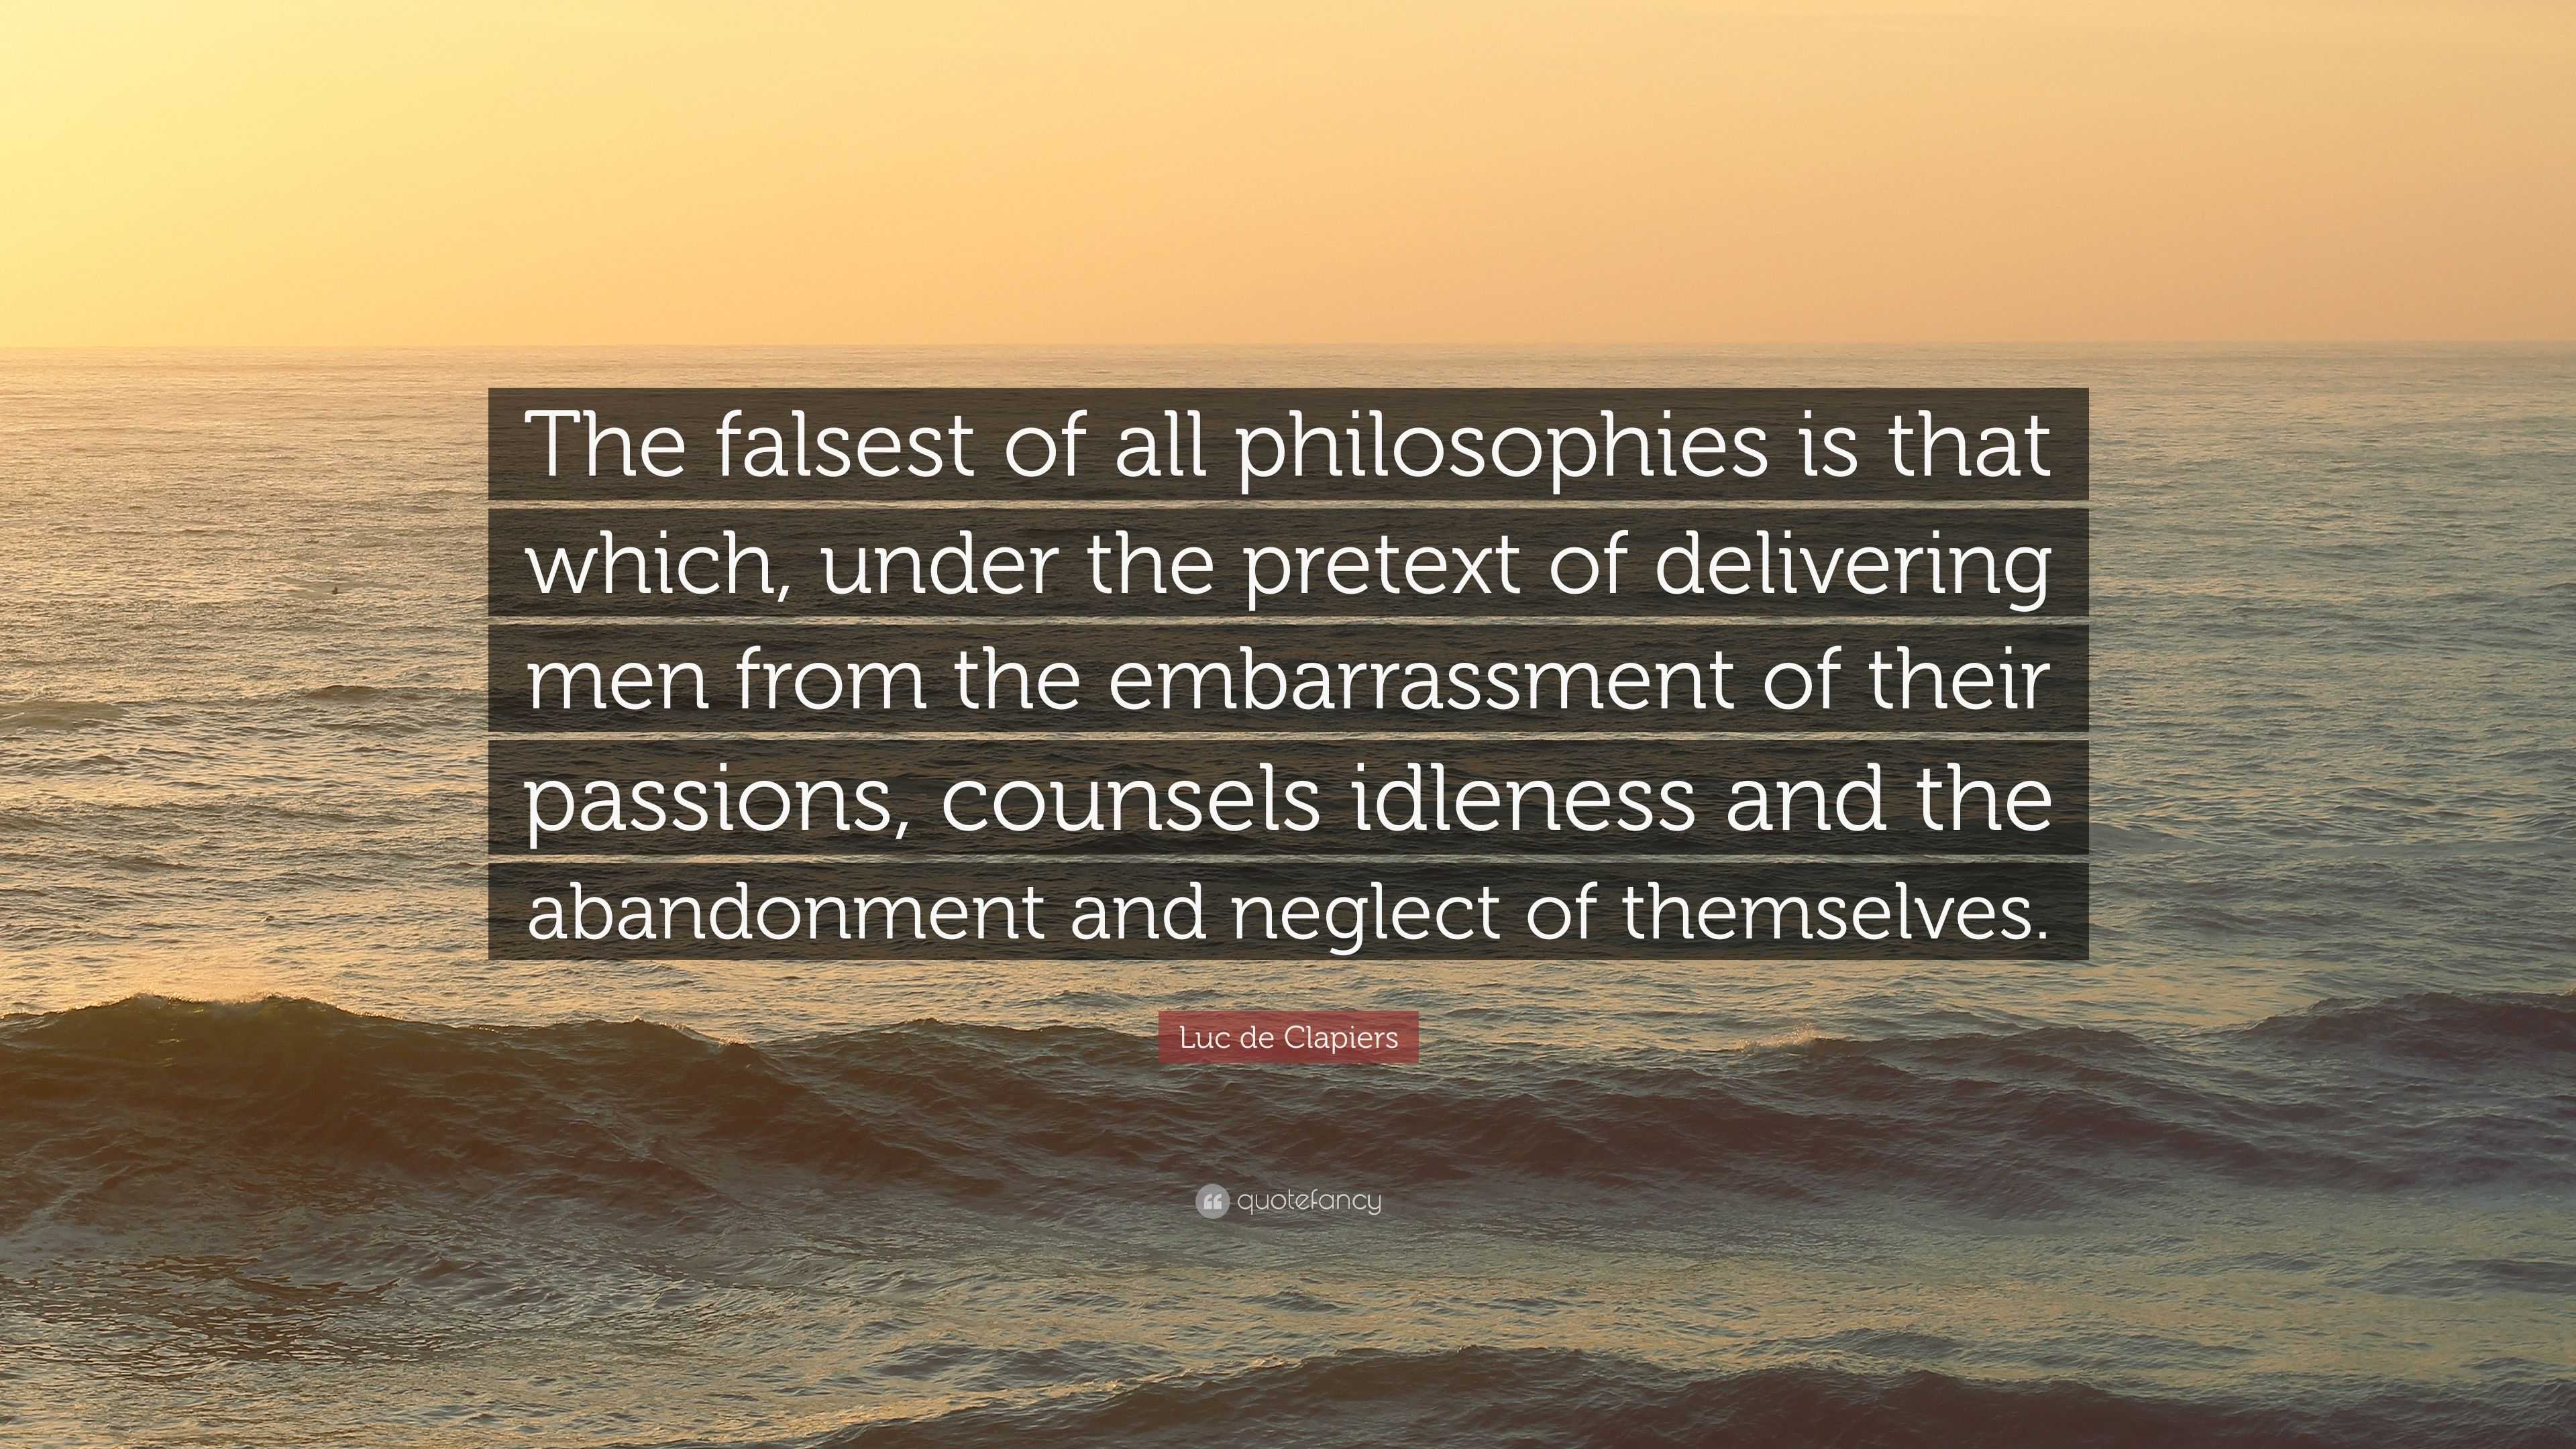 Luc de Clapiers Quote: “The falsest of all philosophies is that which ...